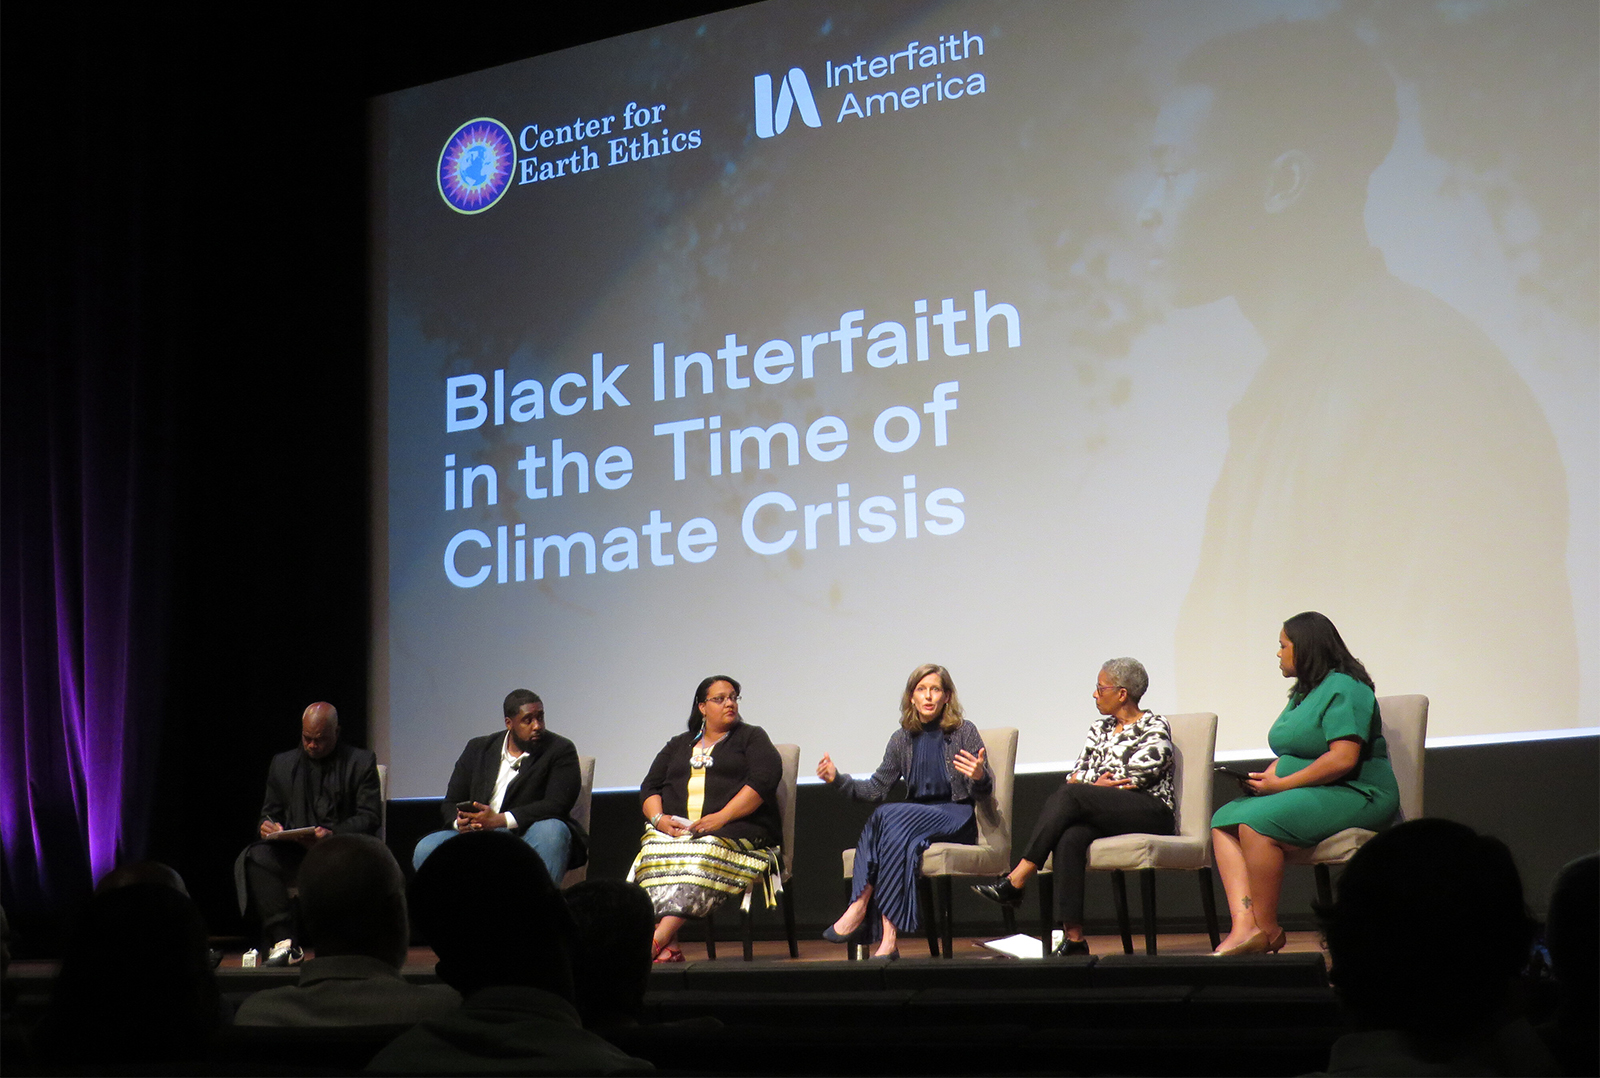 Karenna Gore, center, participates in a panel at the "Black Interfaith in the Time of Climate Crisis" event at the Smithsonian’s National Museum of African American History and Culture, Tuesday, May 17, 2022, in Washington. RNS photo by Adelle M. Banks